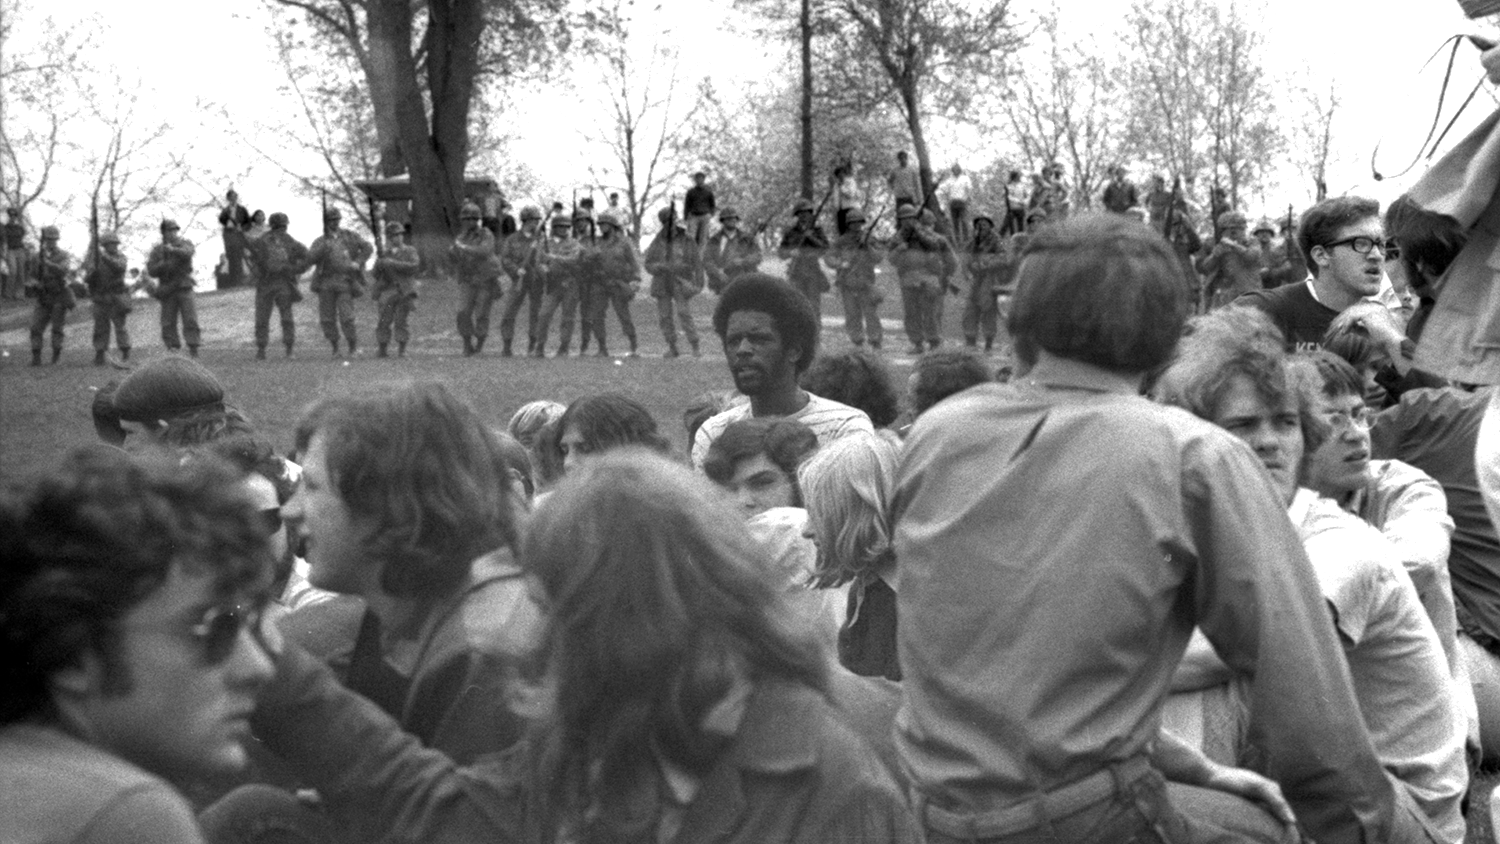 Explore the Kent State Shootings Digital Archive (photo by Ronald P. McNees)